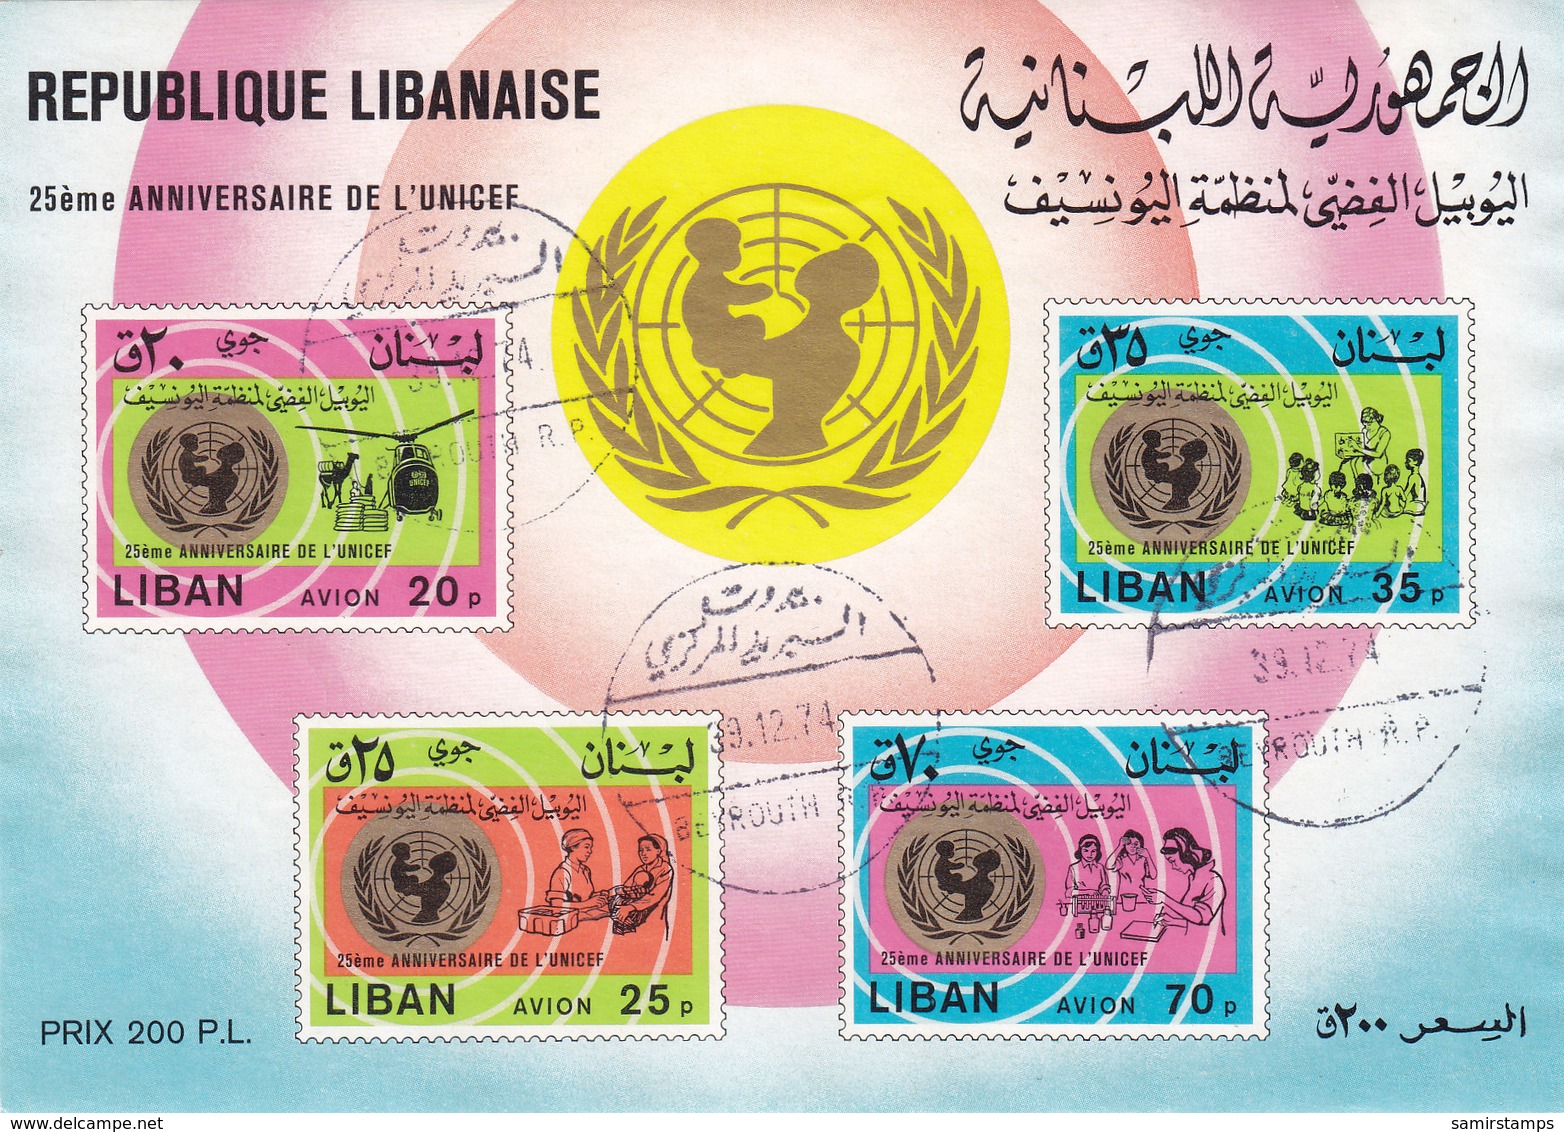 Lebanon-Liban 1974,UNICEF  Souvenir Sheet  Fine USED 7 CONDITION - REF. PRICE - SKRILL PAYMENT ONLY - Lebanon